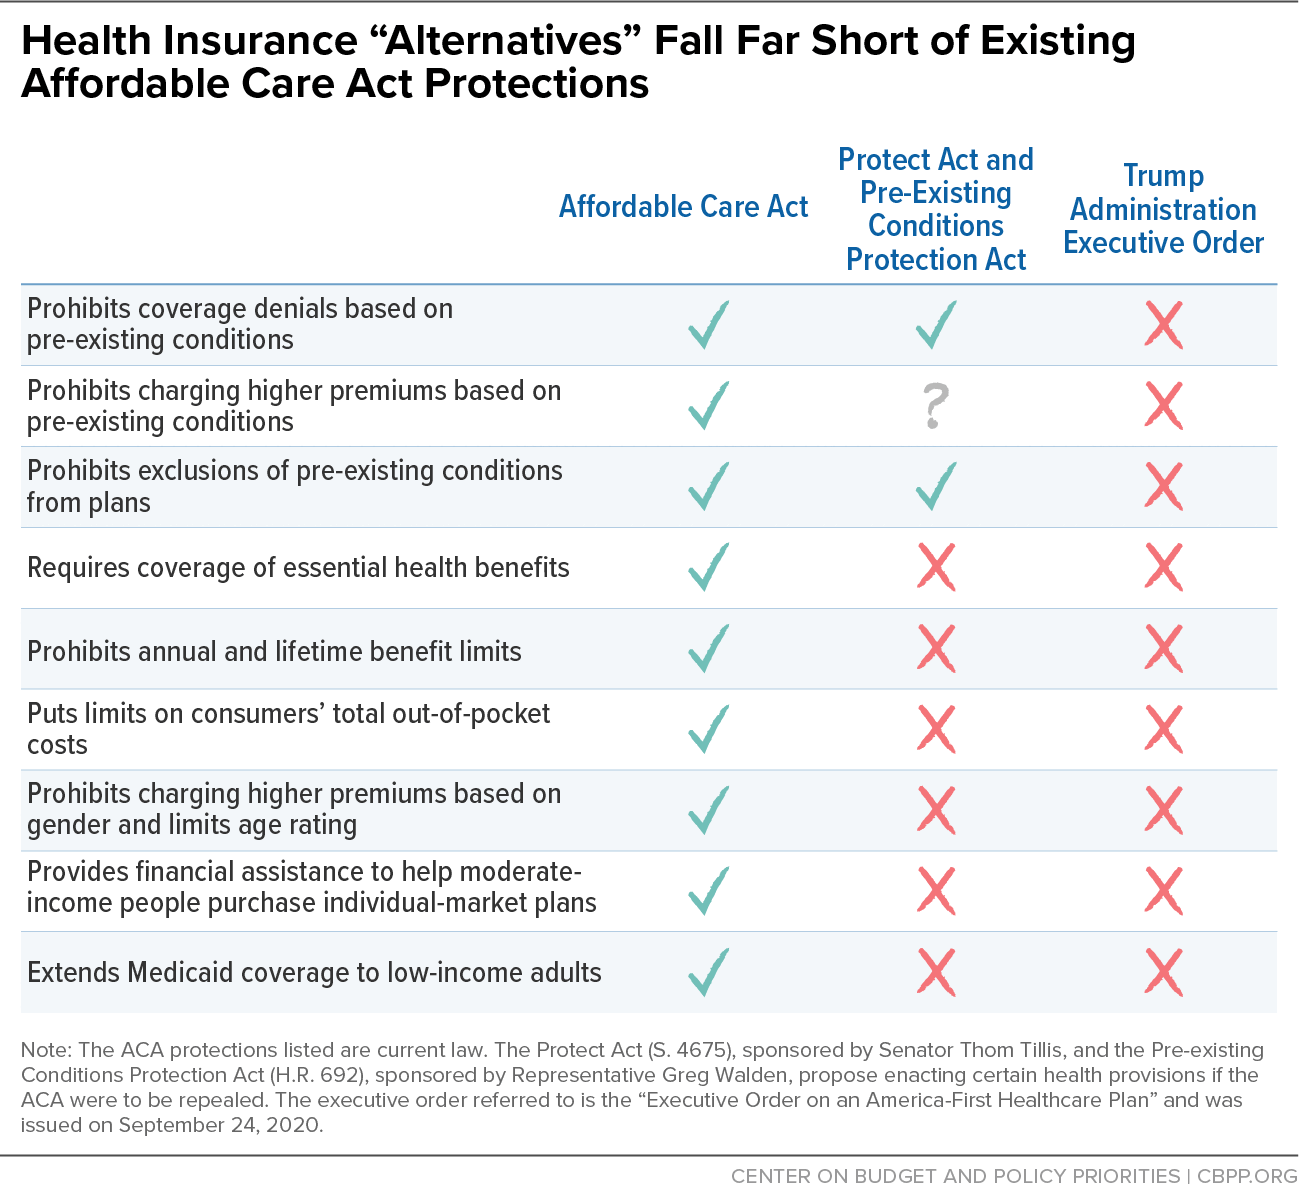 Health Insurance “Alternatives” Fall Far Short of Existing Affordable Care Act Protections